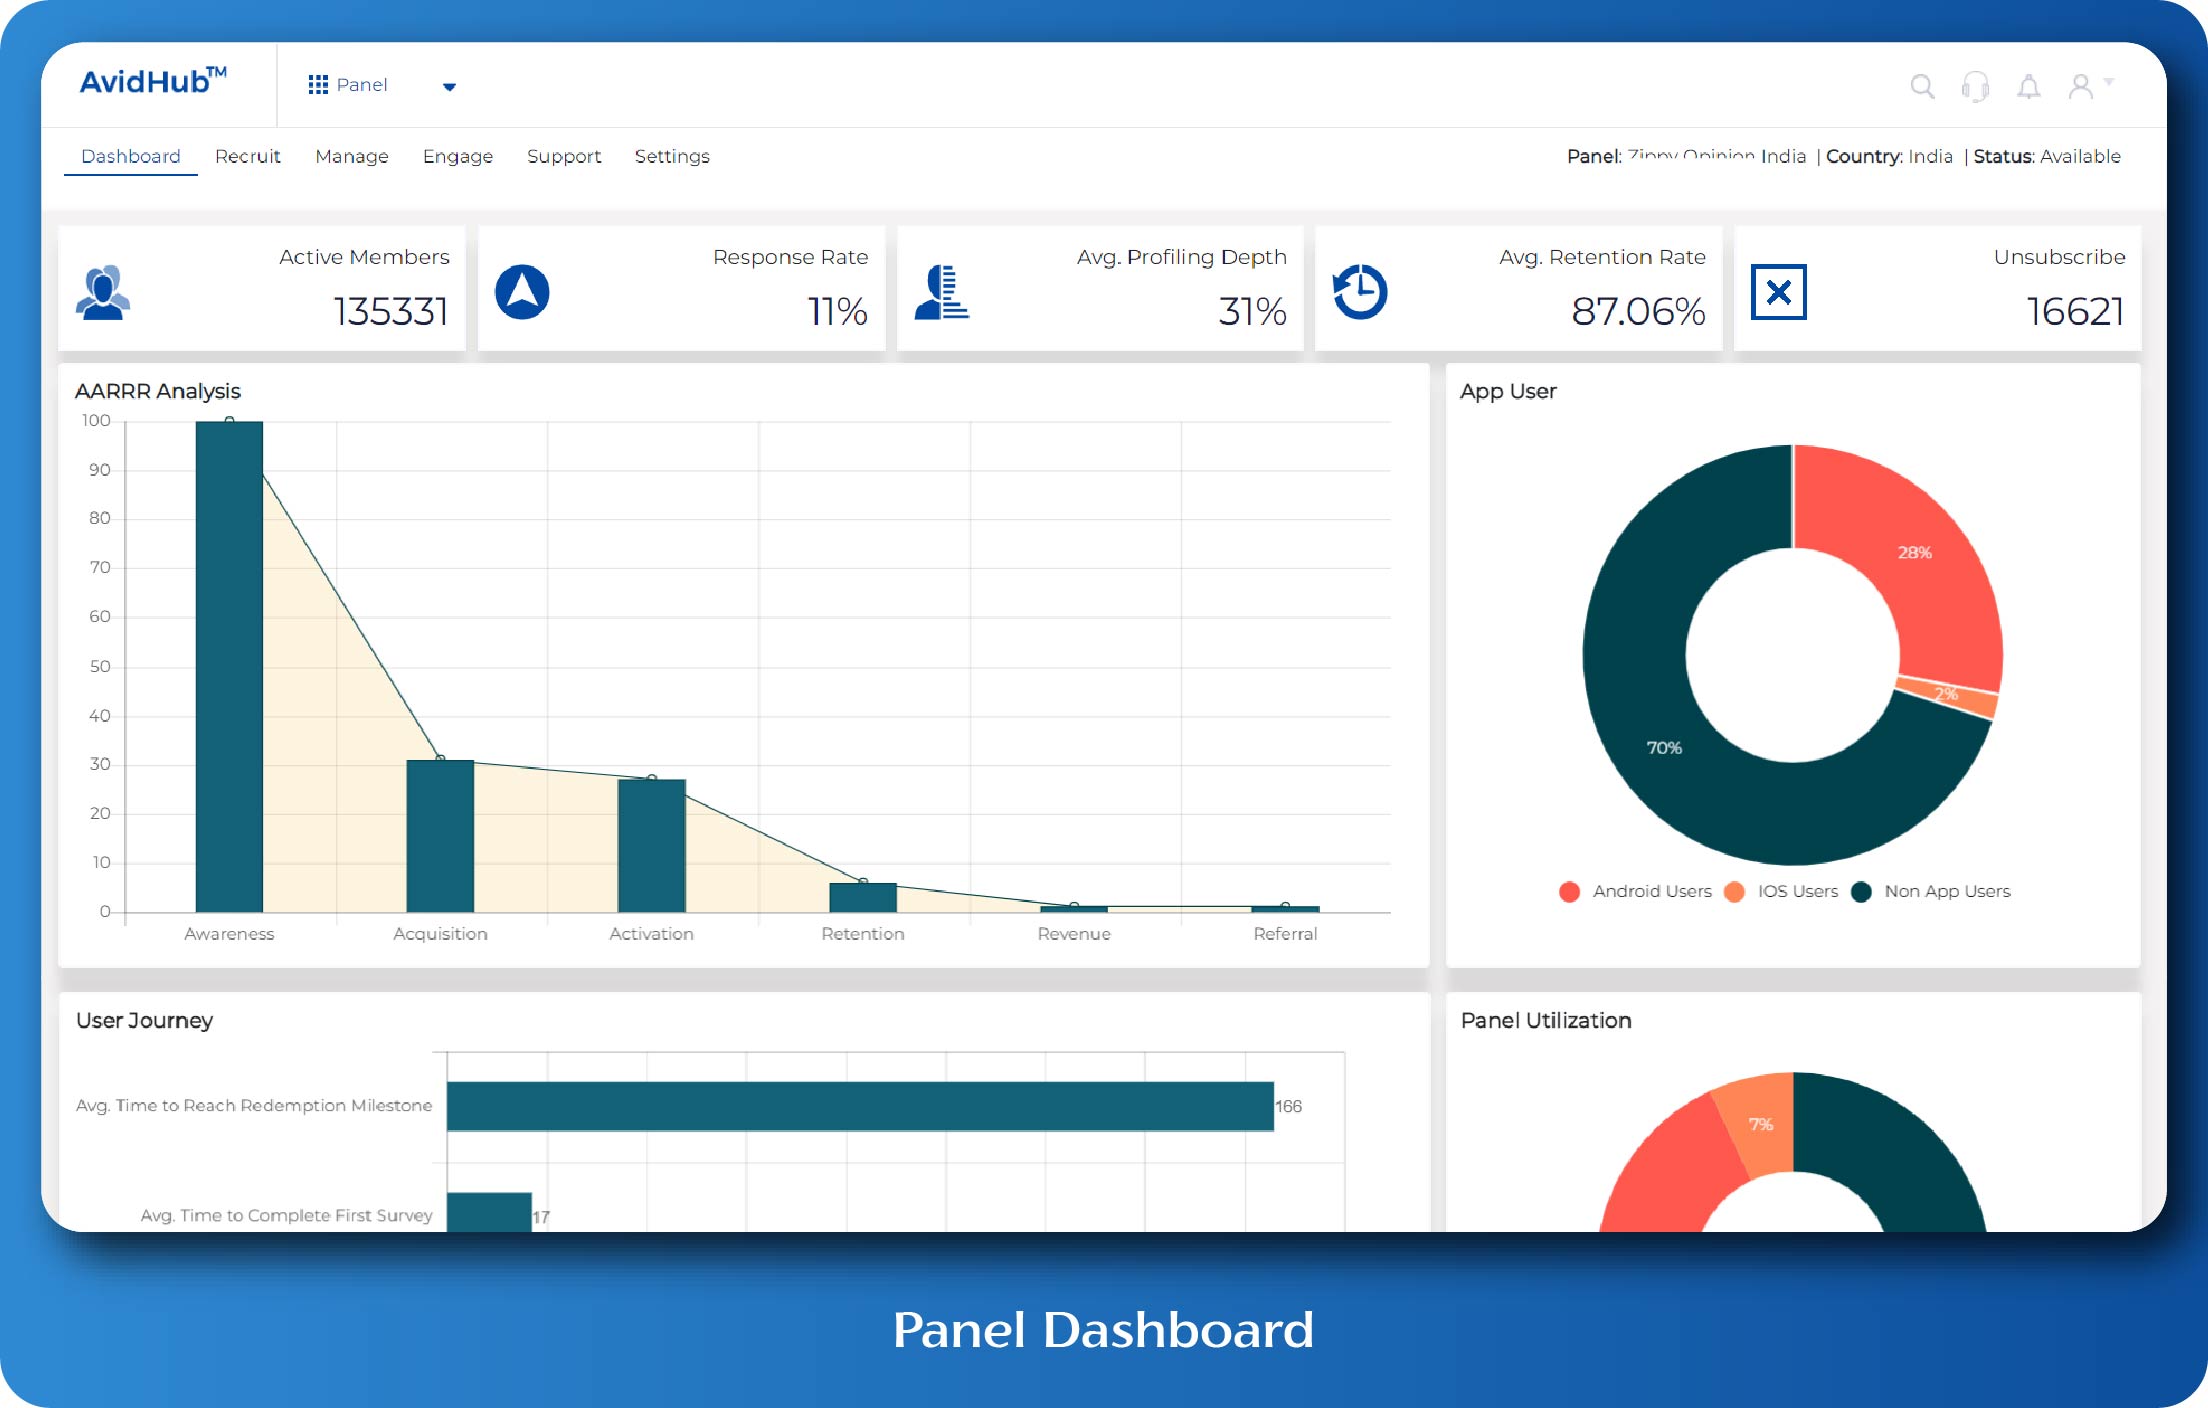 Keep track of all your panel engagement activities and analysis for quick monitoring & management